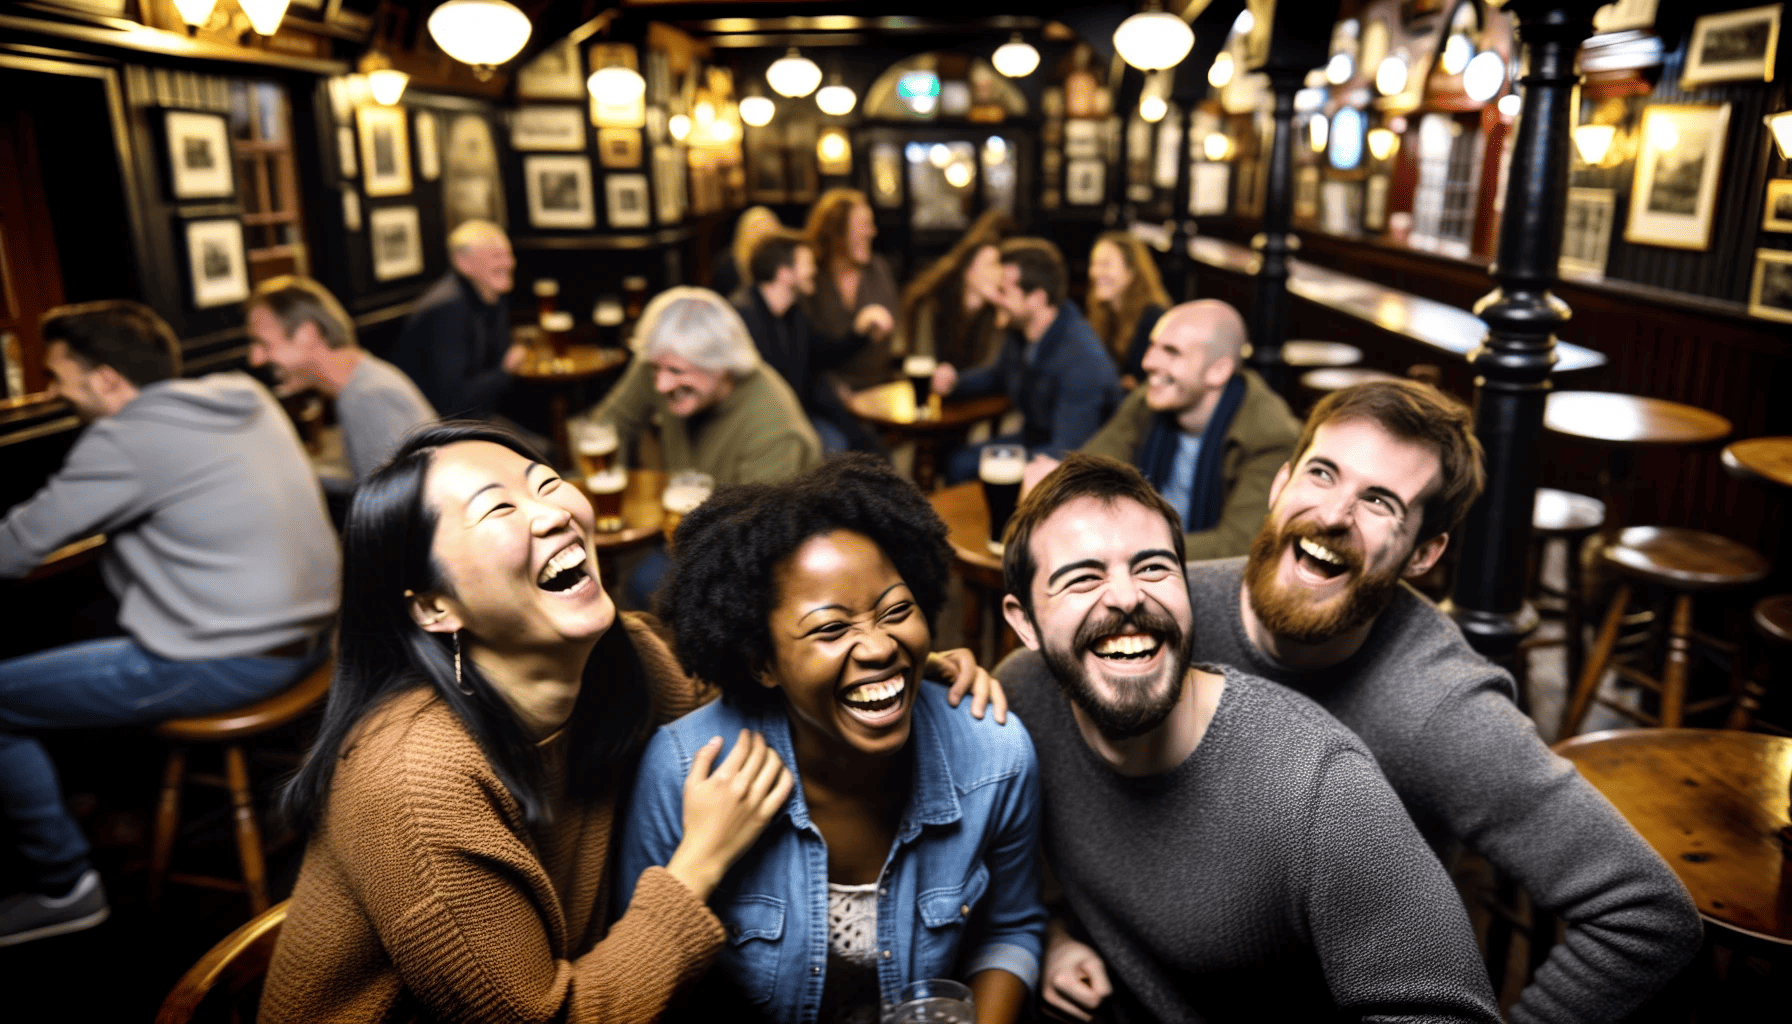 A group of people laughing in a pub